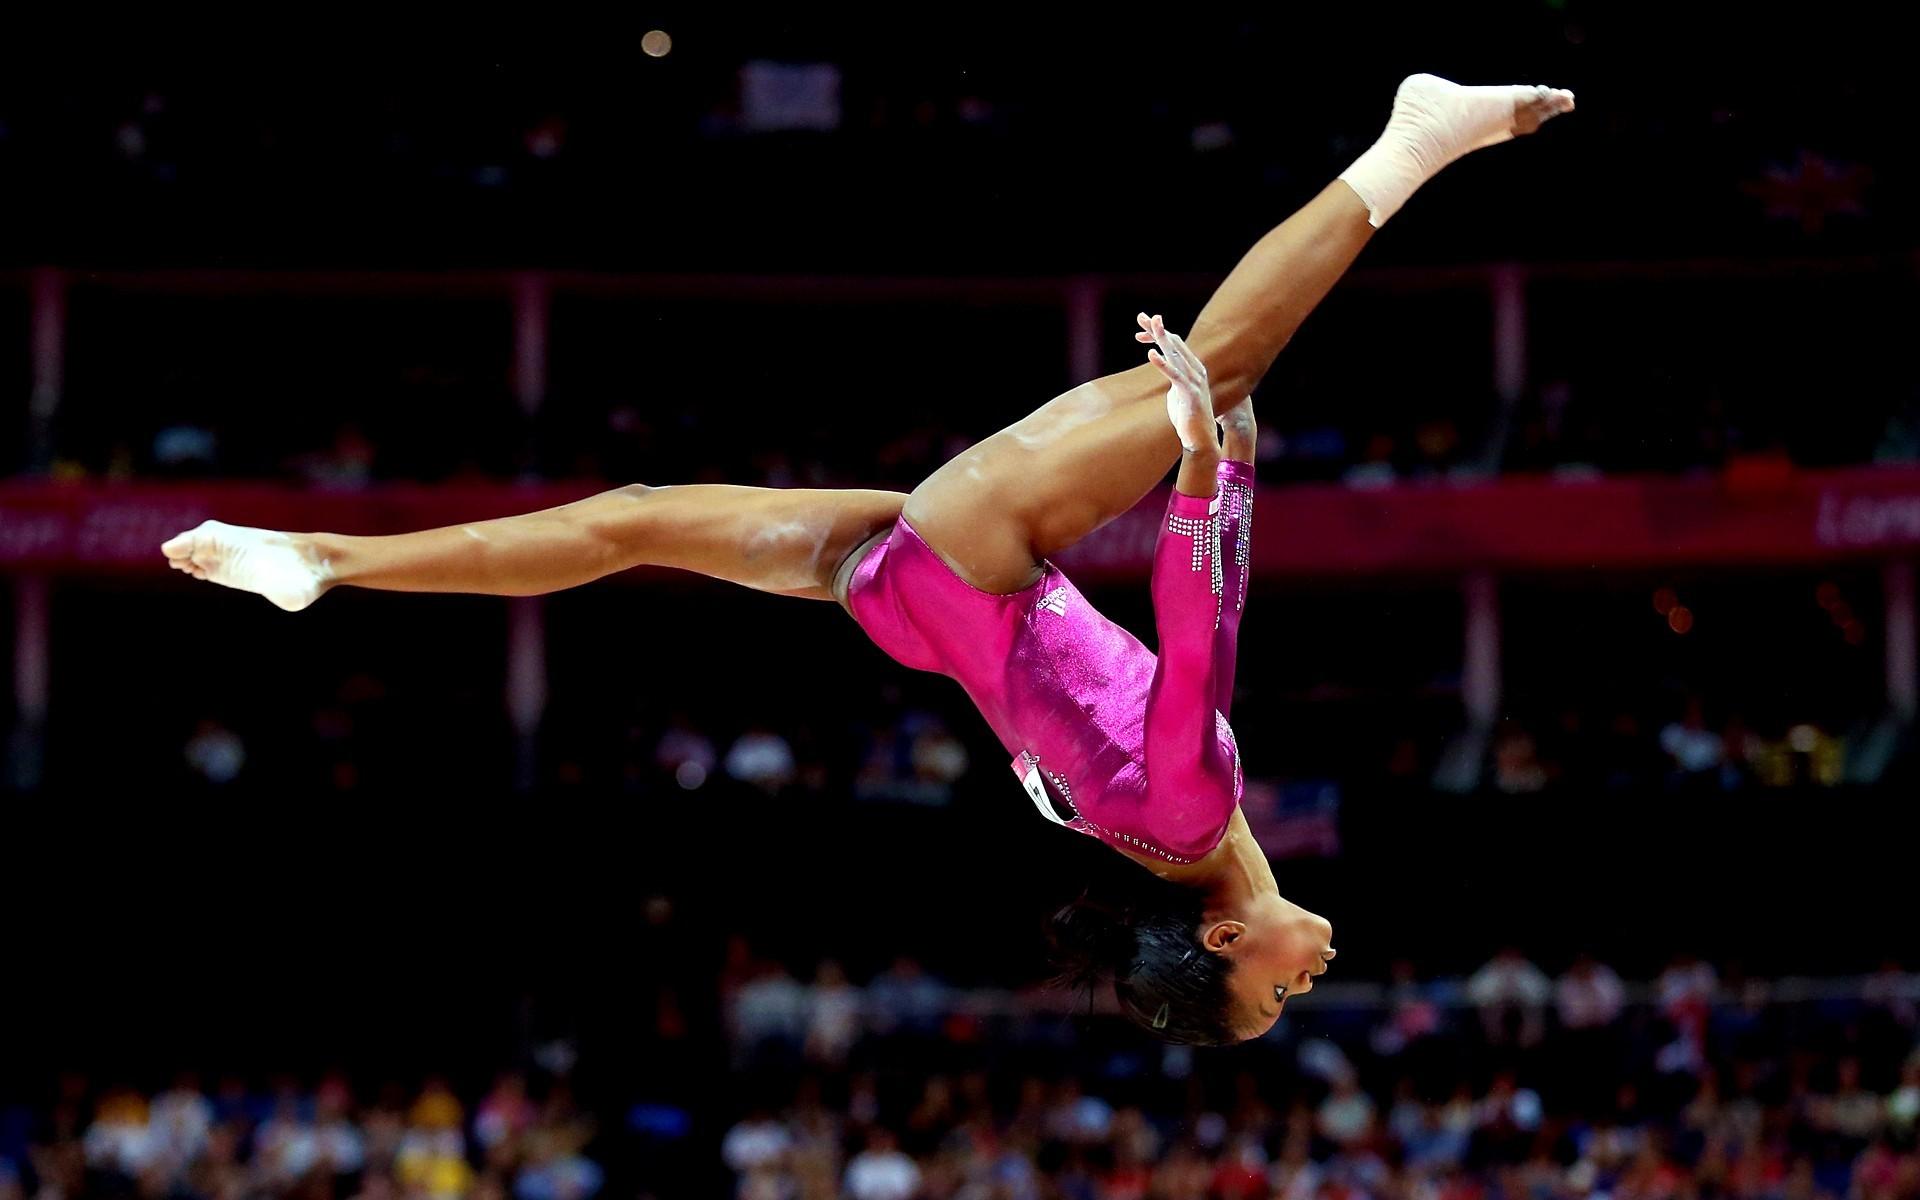 Gymnastics Picture HD Cool Image High Definition Tablet